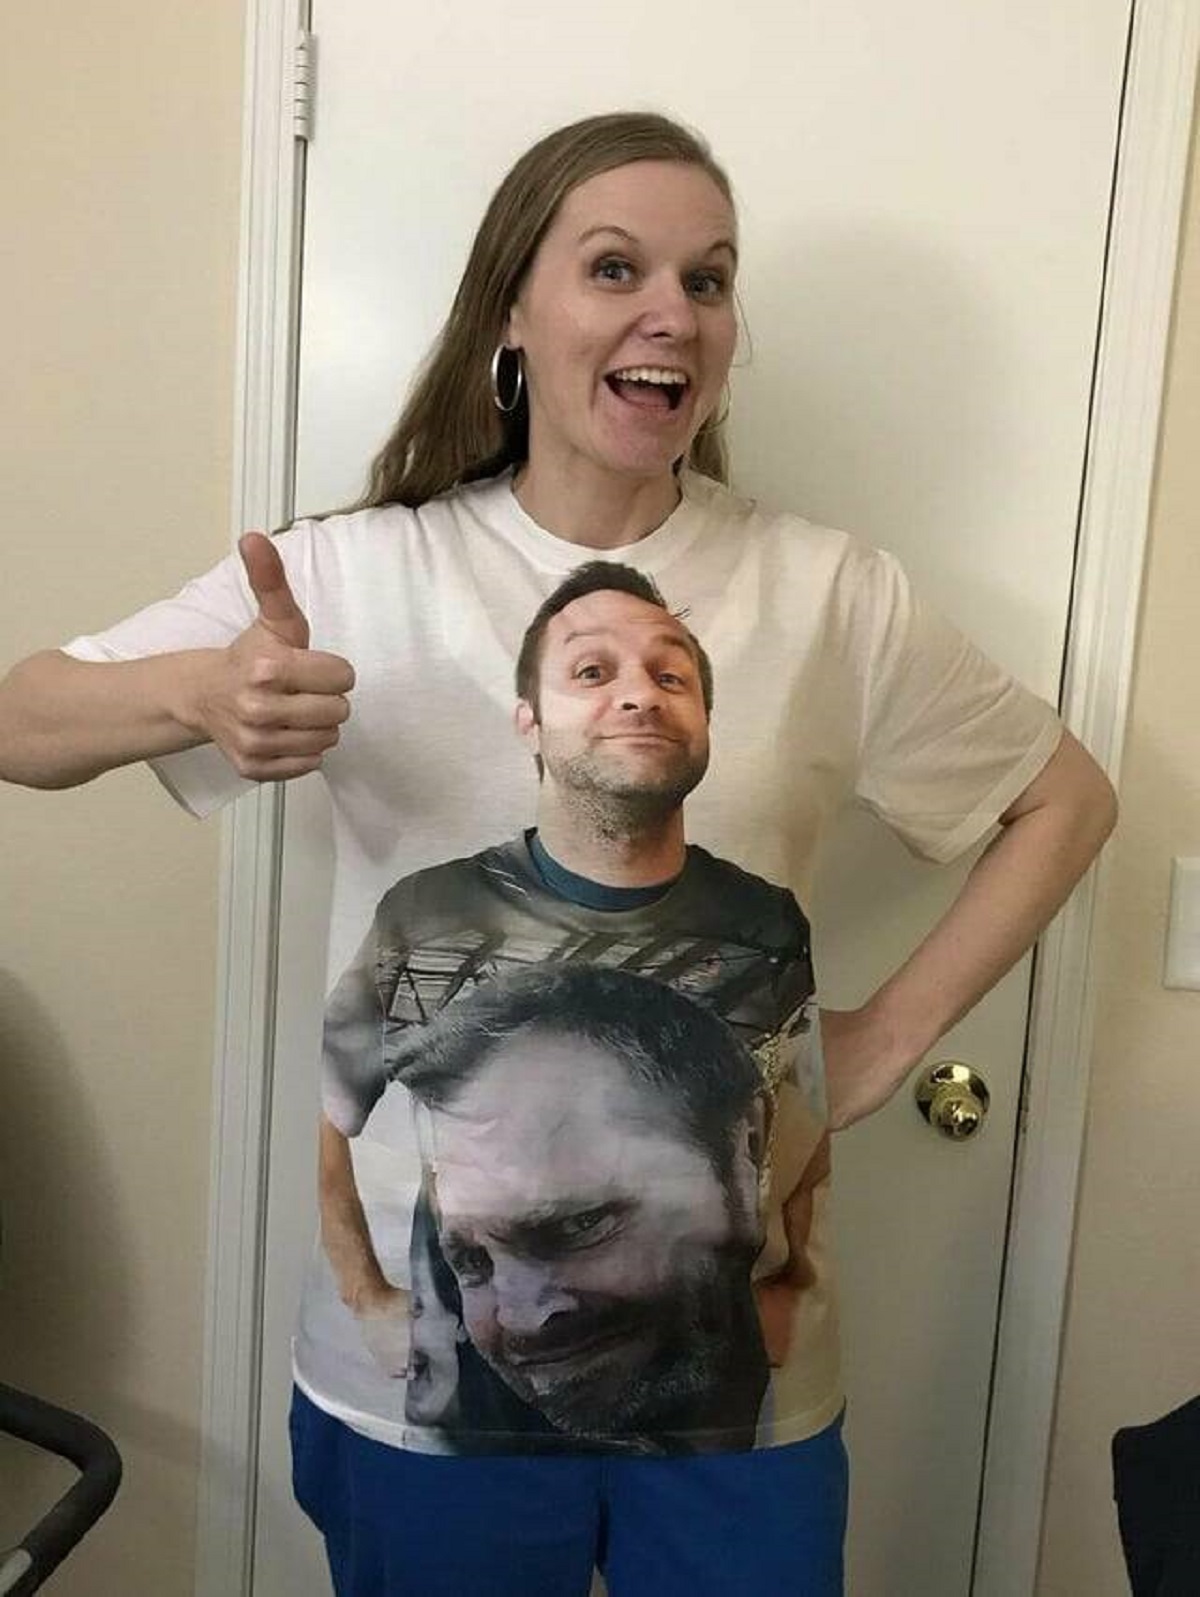 "My sister wearing a shirt of me wearing a shirt of my brother."